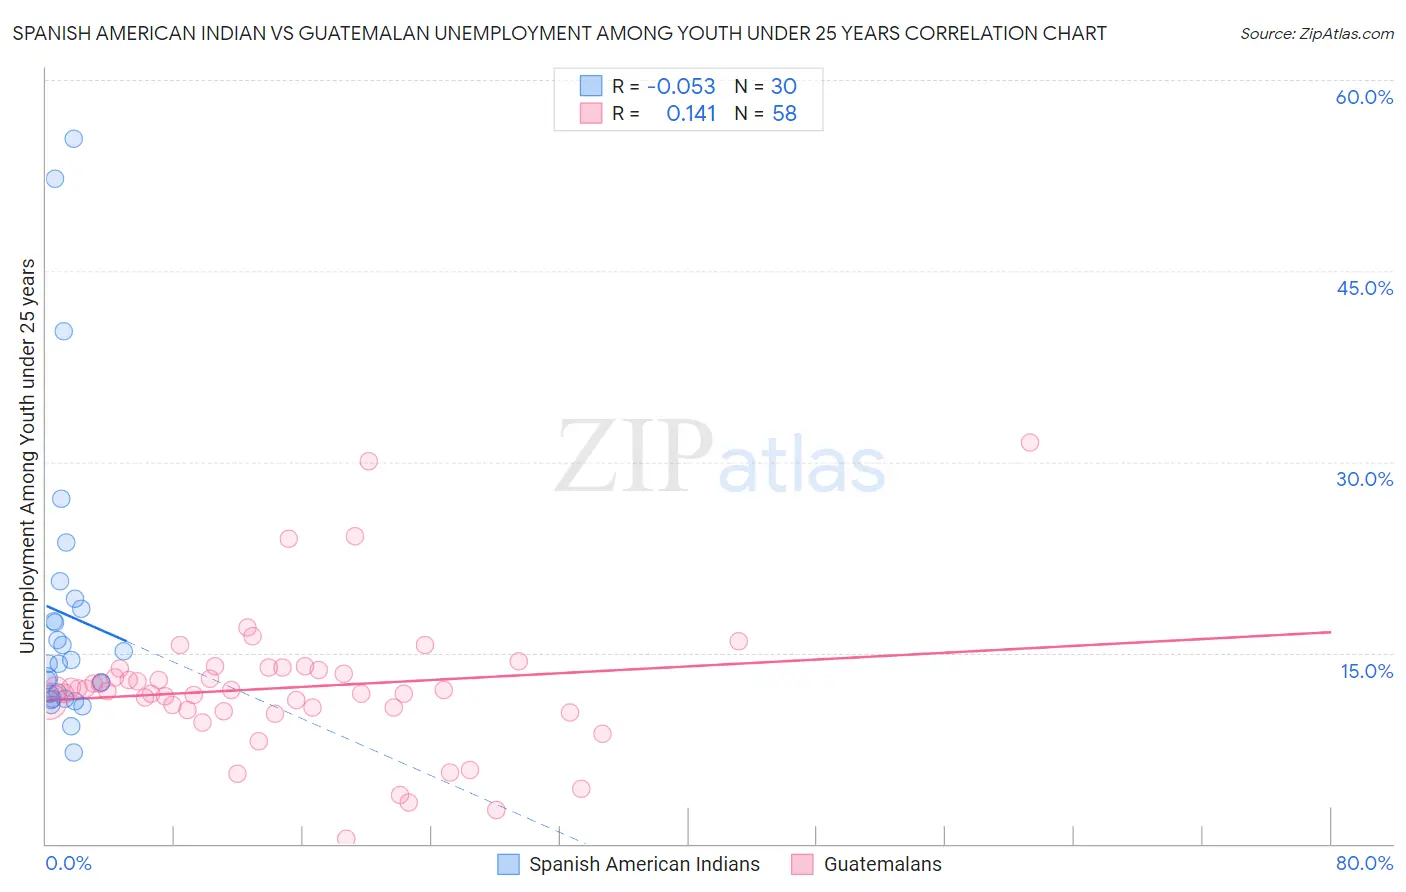 Spanish American Indian vs Guatemalan Unemployment Among Youth under 25 years